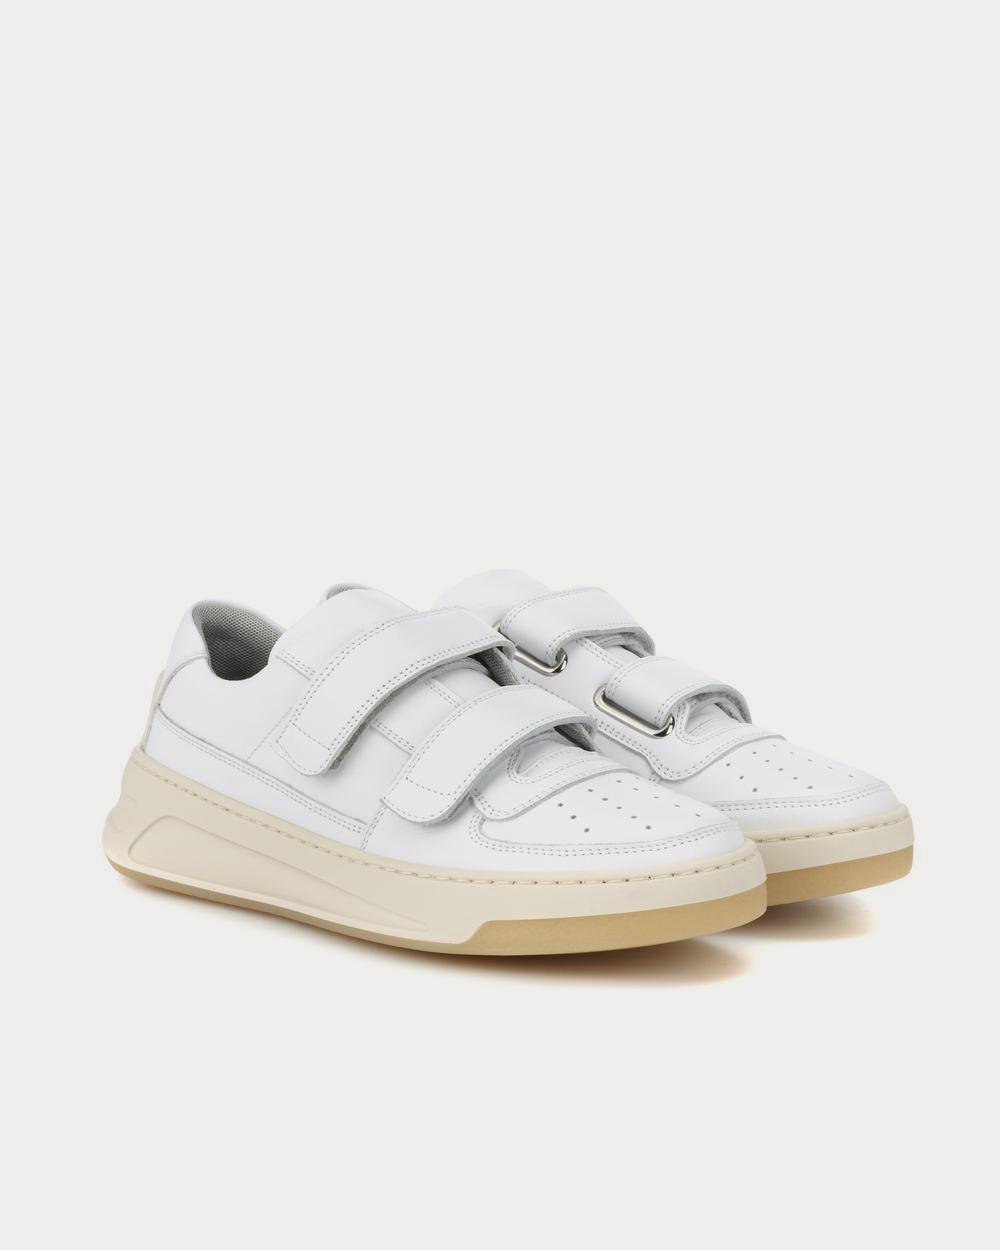 Acne Studios - Steffey leather White Low Top Sneakers